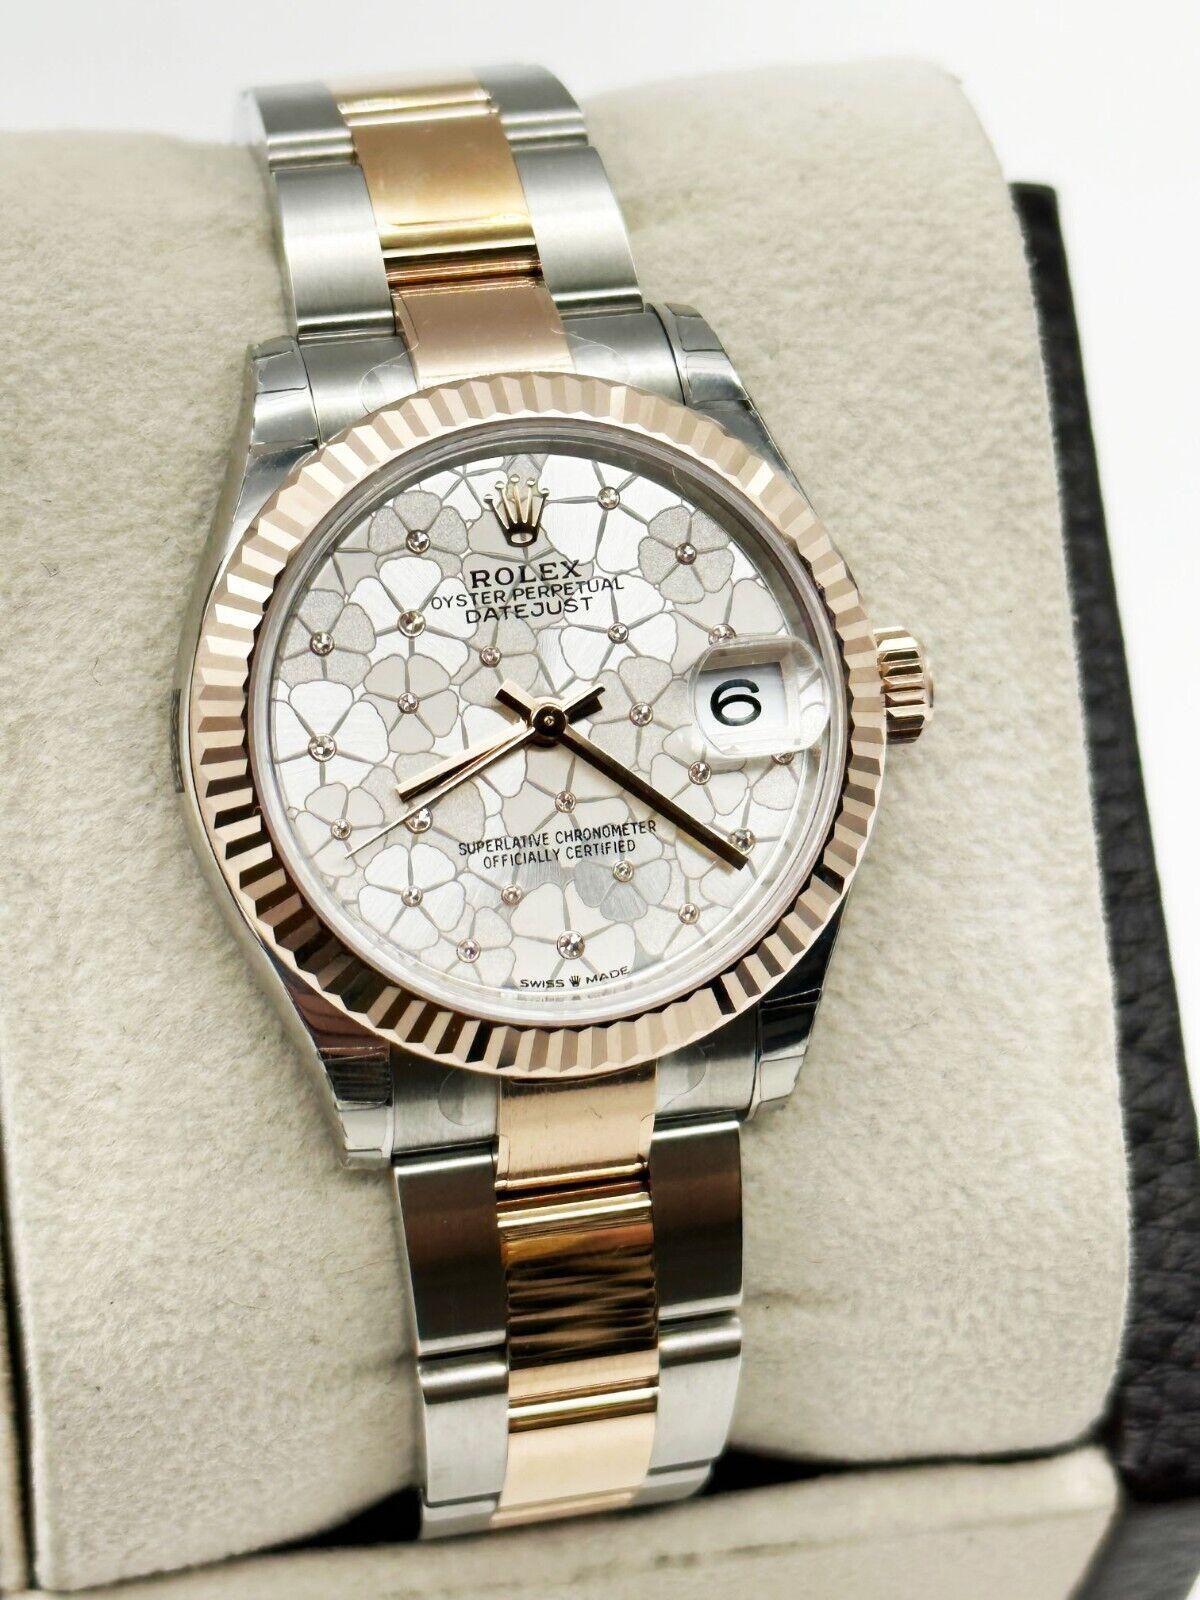 Style Number: 278271

Serial: L7727***

Year: 2022

Model: Datejust 

Case Material: Stainless Steel 

Band: 18K Rose Gold & Stainless Steel 

Bezel: 18K Rose Gold  

Dial: Original Floral Diamond Dial 

Face: Sapphire Crystal 
 
Case Size: 31mm